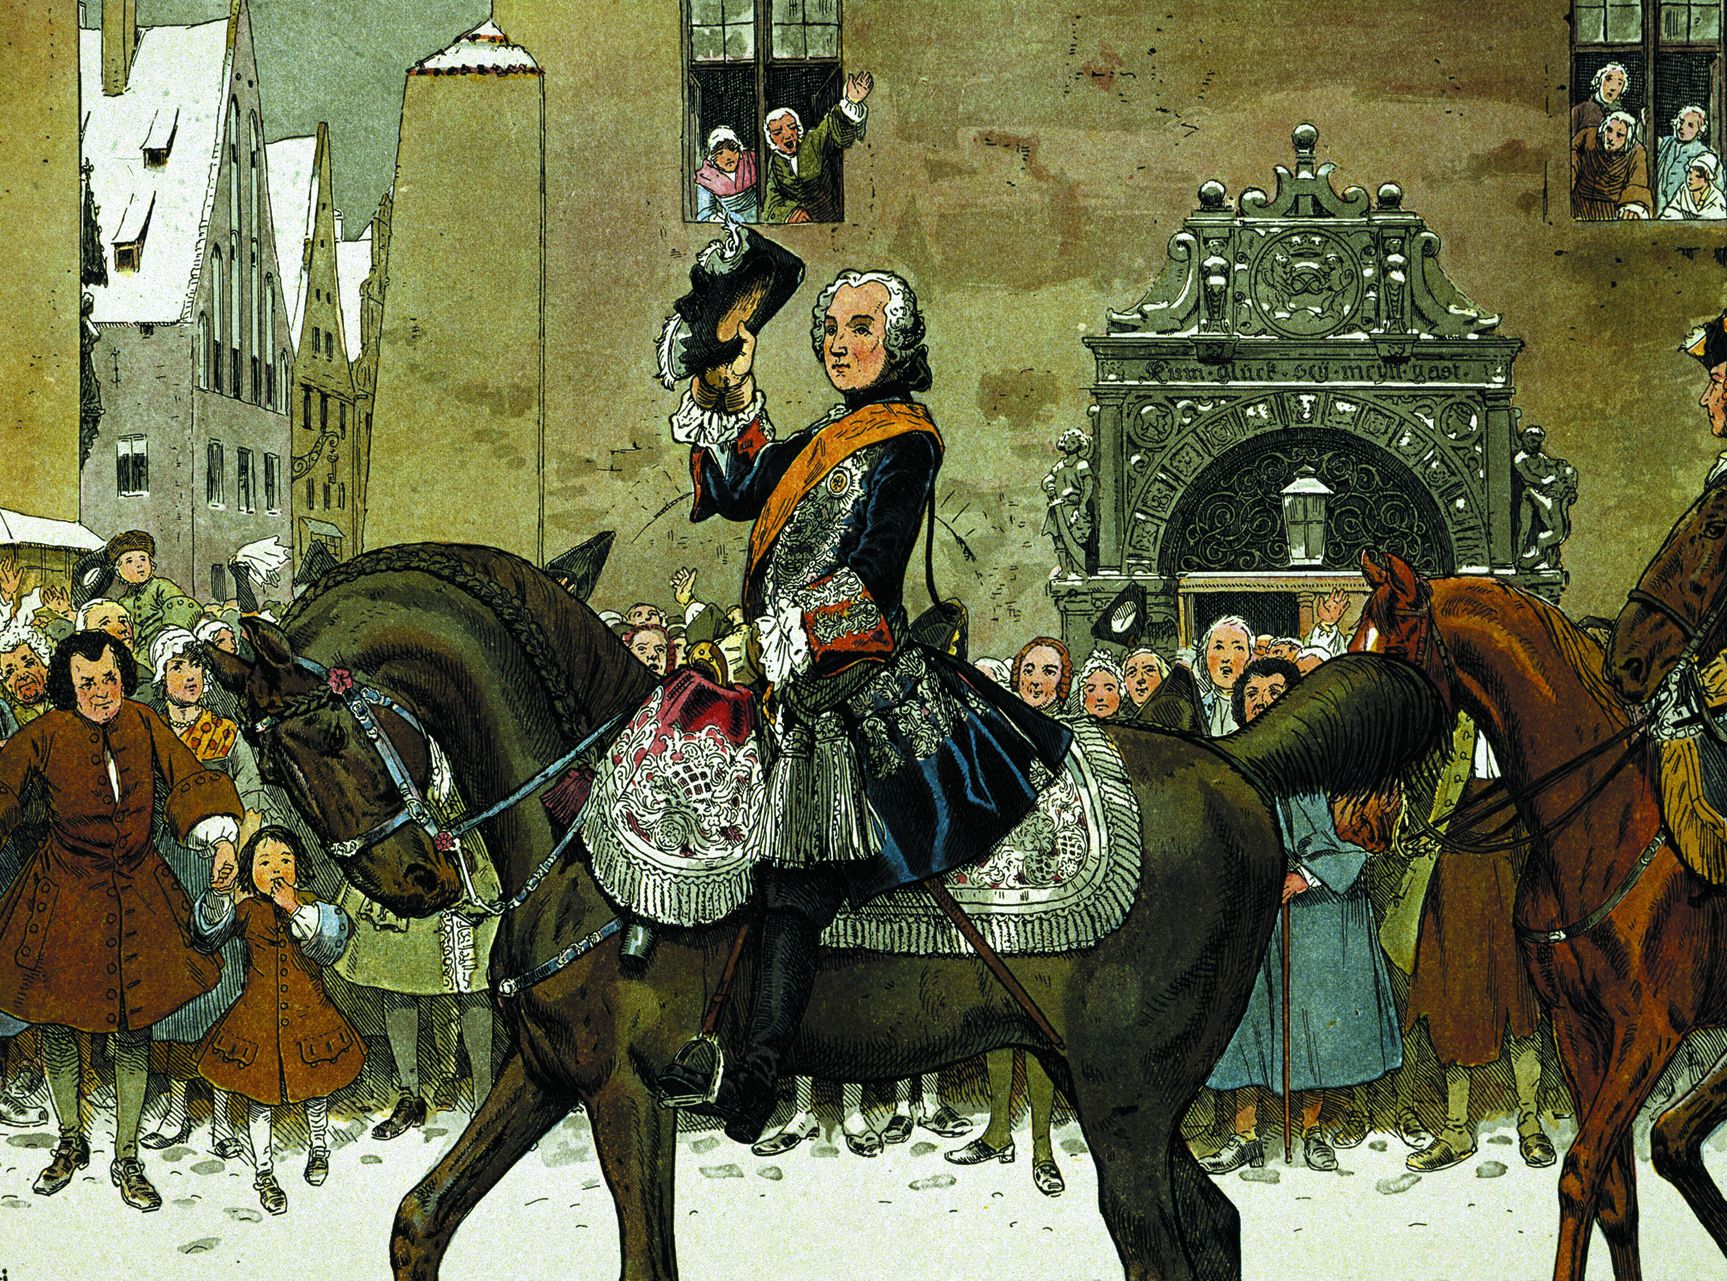 A triumphant Frederick II accepts the surrender of the Silesian city of Breslau on January 1, 1741. The real battle was yet to come.